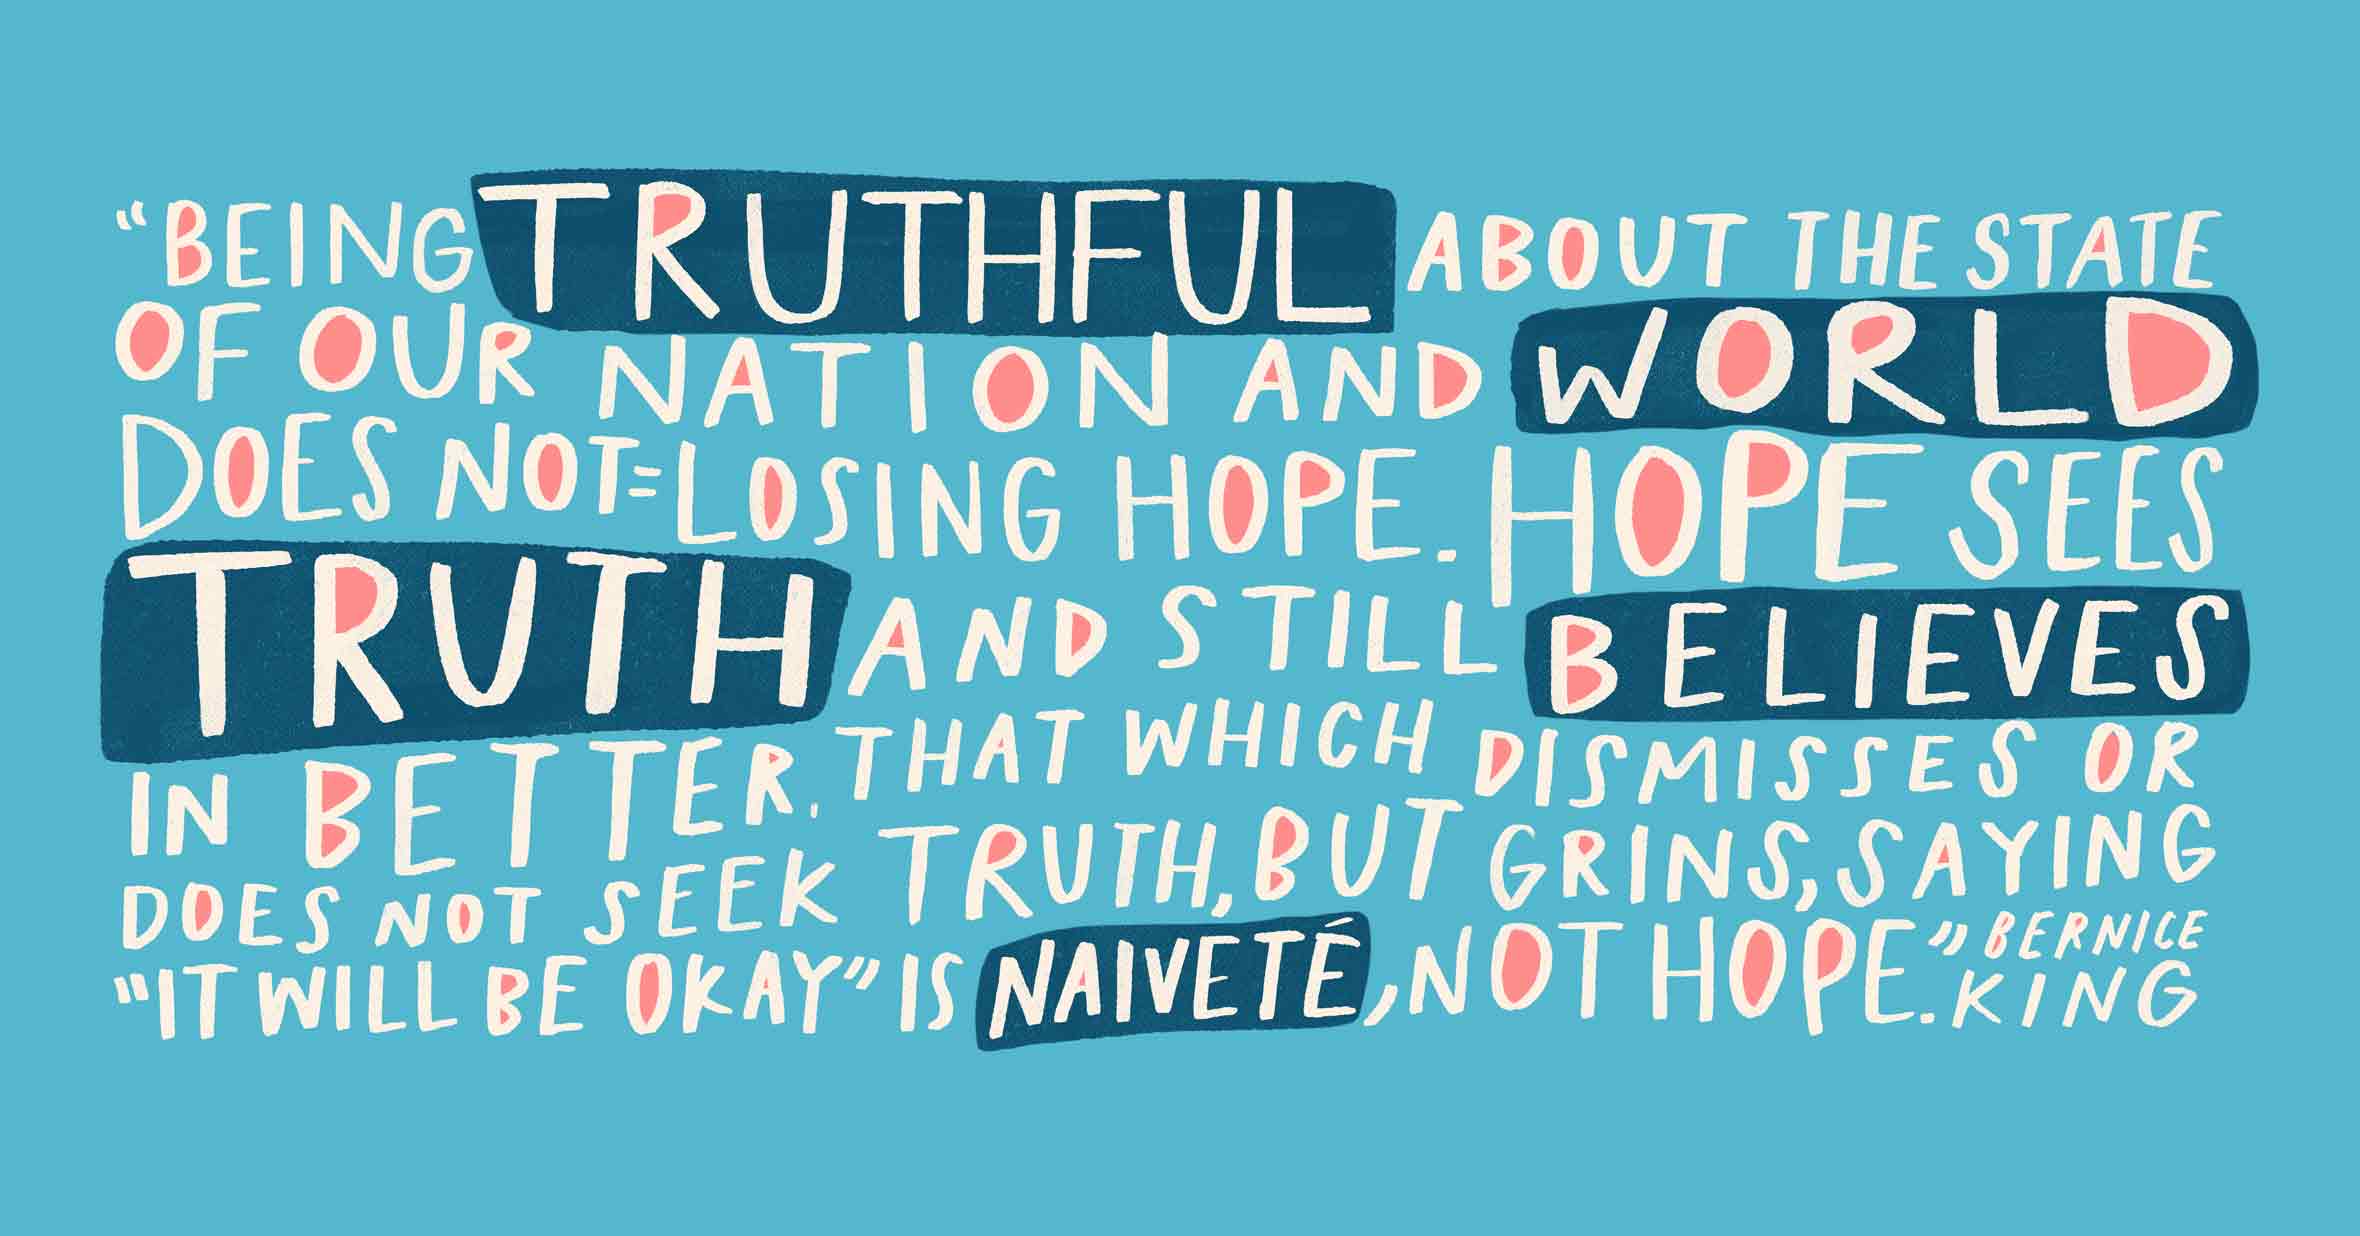 Quote illustrated by Morgan Harper Nichols in her signature style: “Being truthful about the state of our nation and world does not equal losing hope. Hope sees truth and still believes in better. That which dismisses or does not seek truth, but grins, saying "It will be okay," is naivete, not hope.” — Bernice King